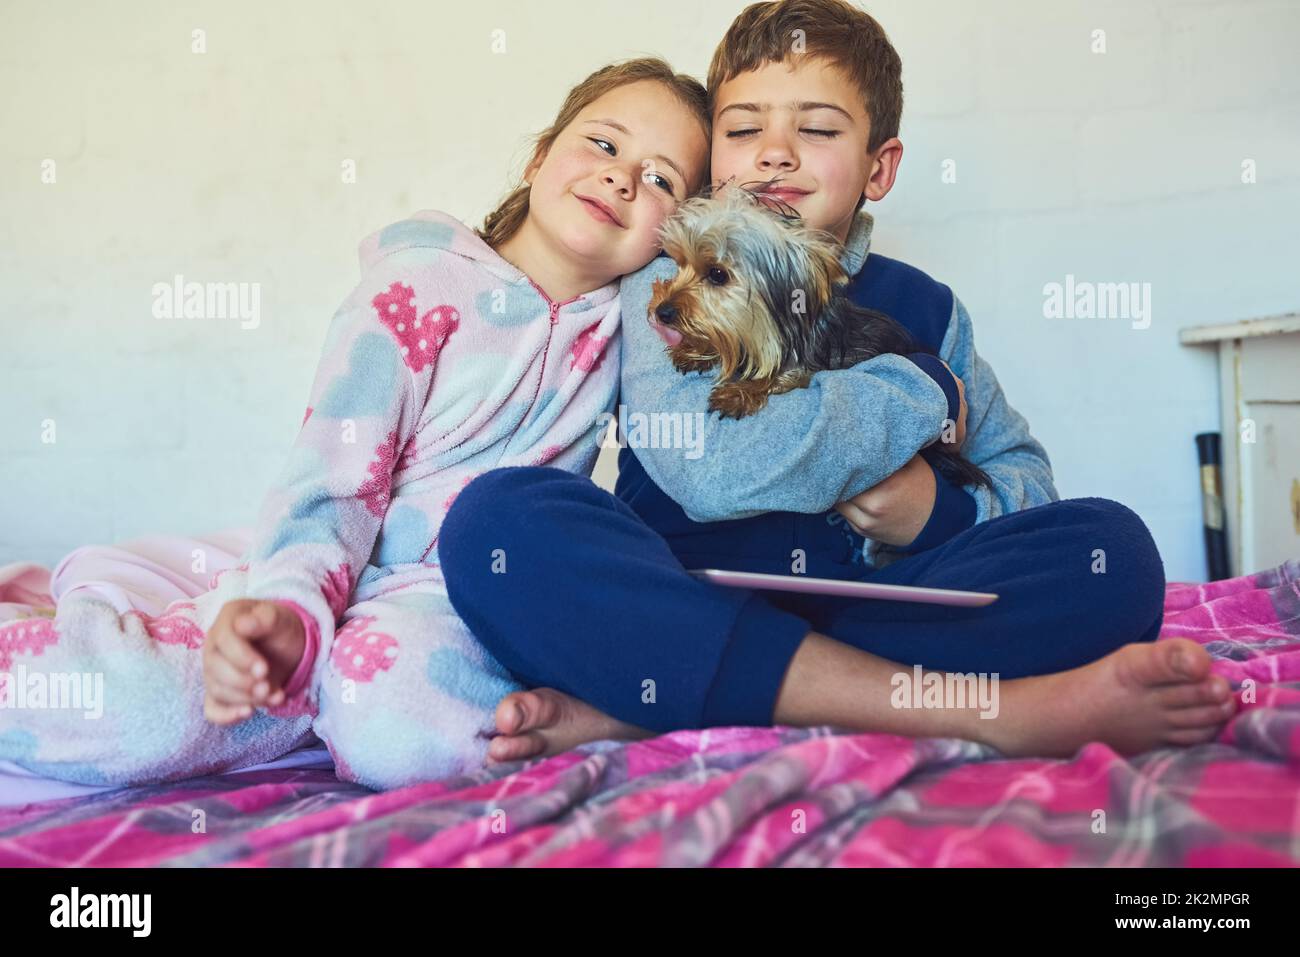 Puppy will always be our best pal. Shot of two young siblings bonding with their pet dog at home. Stock Photo